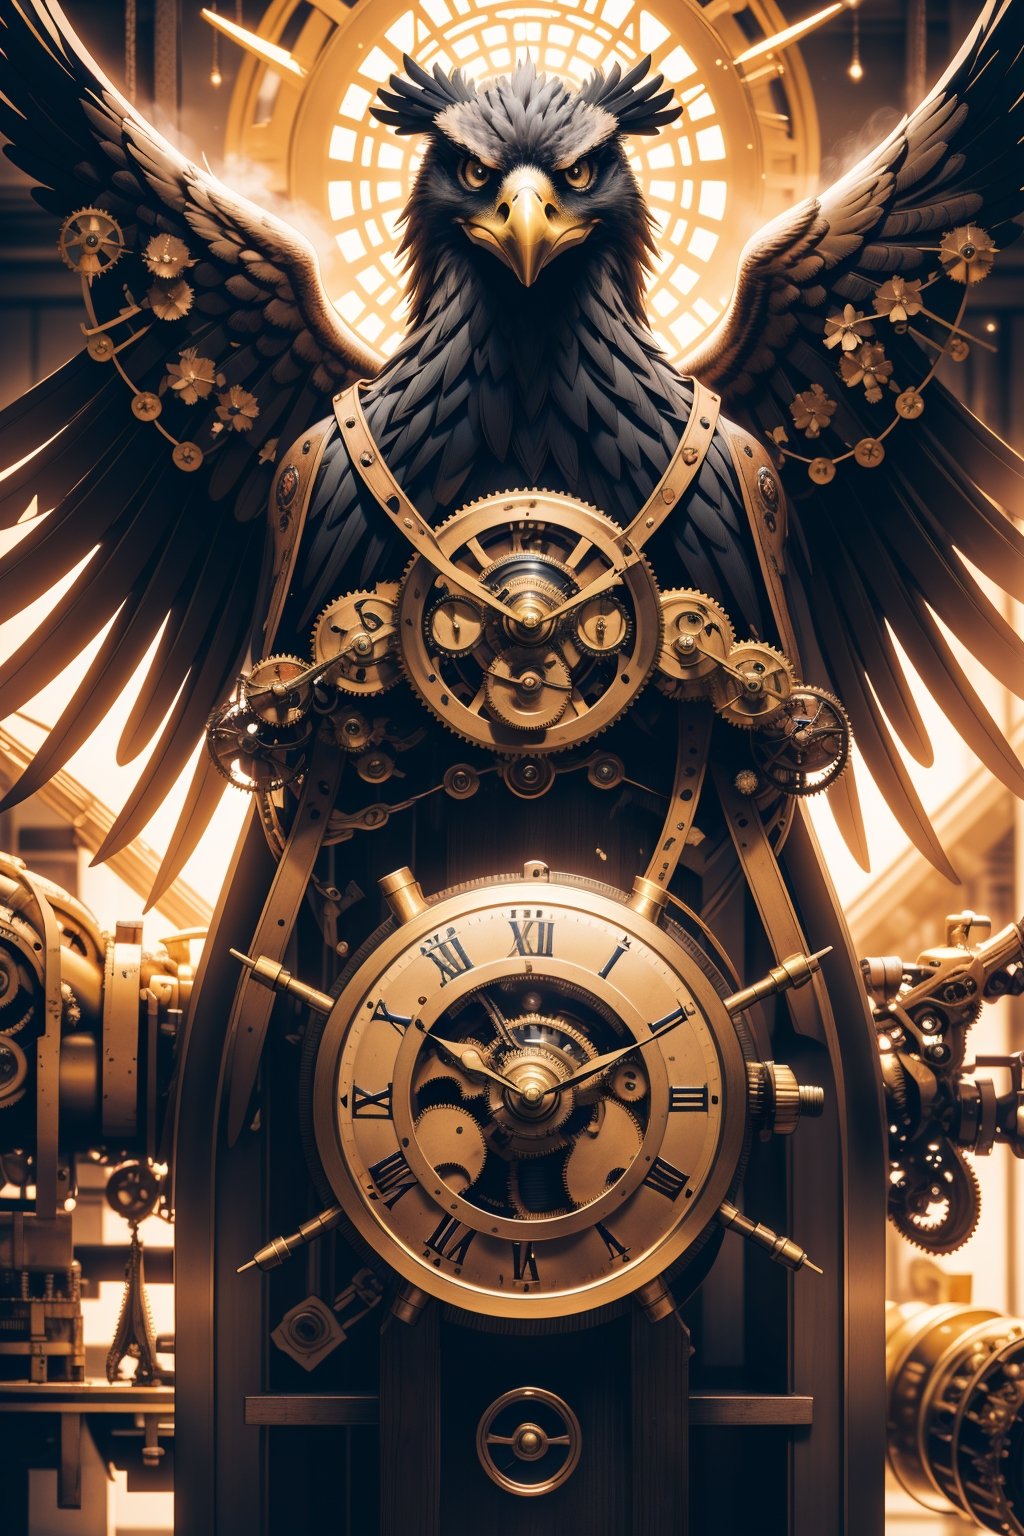 Generates an image of a majestic Steampunk-style robot eagle. Its body is meticulously constructed using intricate clockwork mechanisms, with gears and bronze parts forming its structure. Its rusted metal wings spread elegantly, displaying details of rivets and steam pipes. His eyes shine with an intense golden light, while his beak is adorned with brass ornaments. The eagle stands in an imposing pose, as if it is about to take flight into the steamy skies of a Steampunk city,mechanical